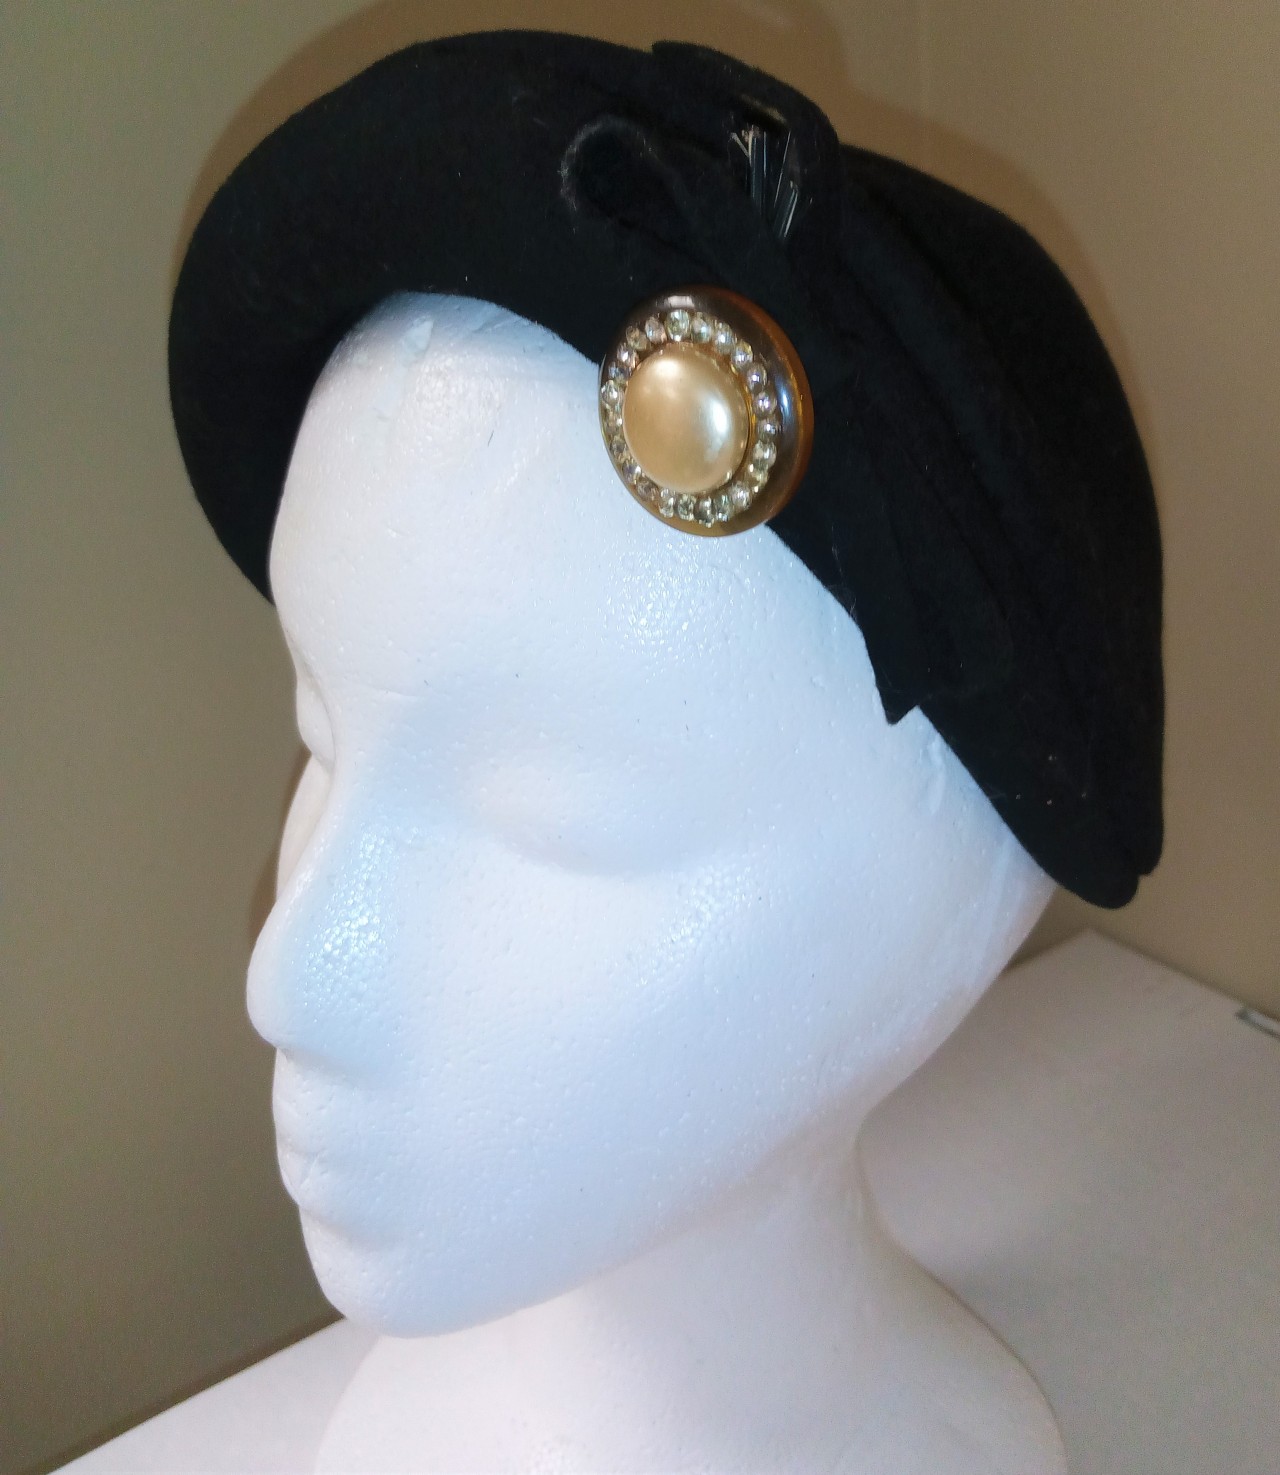 What’s new in our collection this week – more vintage 1930s hats in the collection of Dr. James V. Carmichael. One hat is a deep, hunter green velvet with a rhinestone accent, and the second a black felt with a faux pearl accent surrounded by...